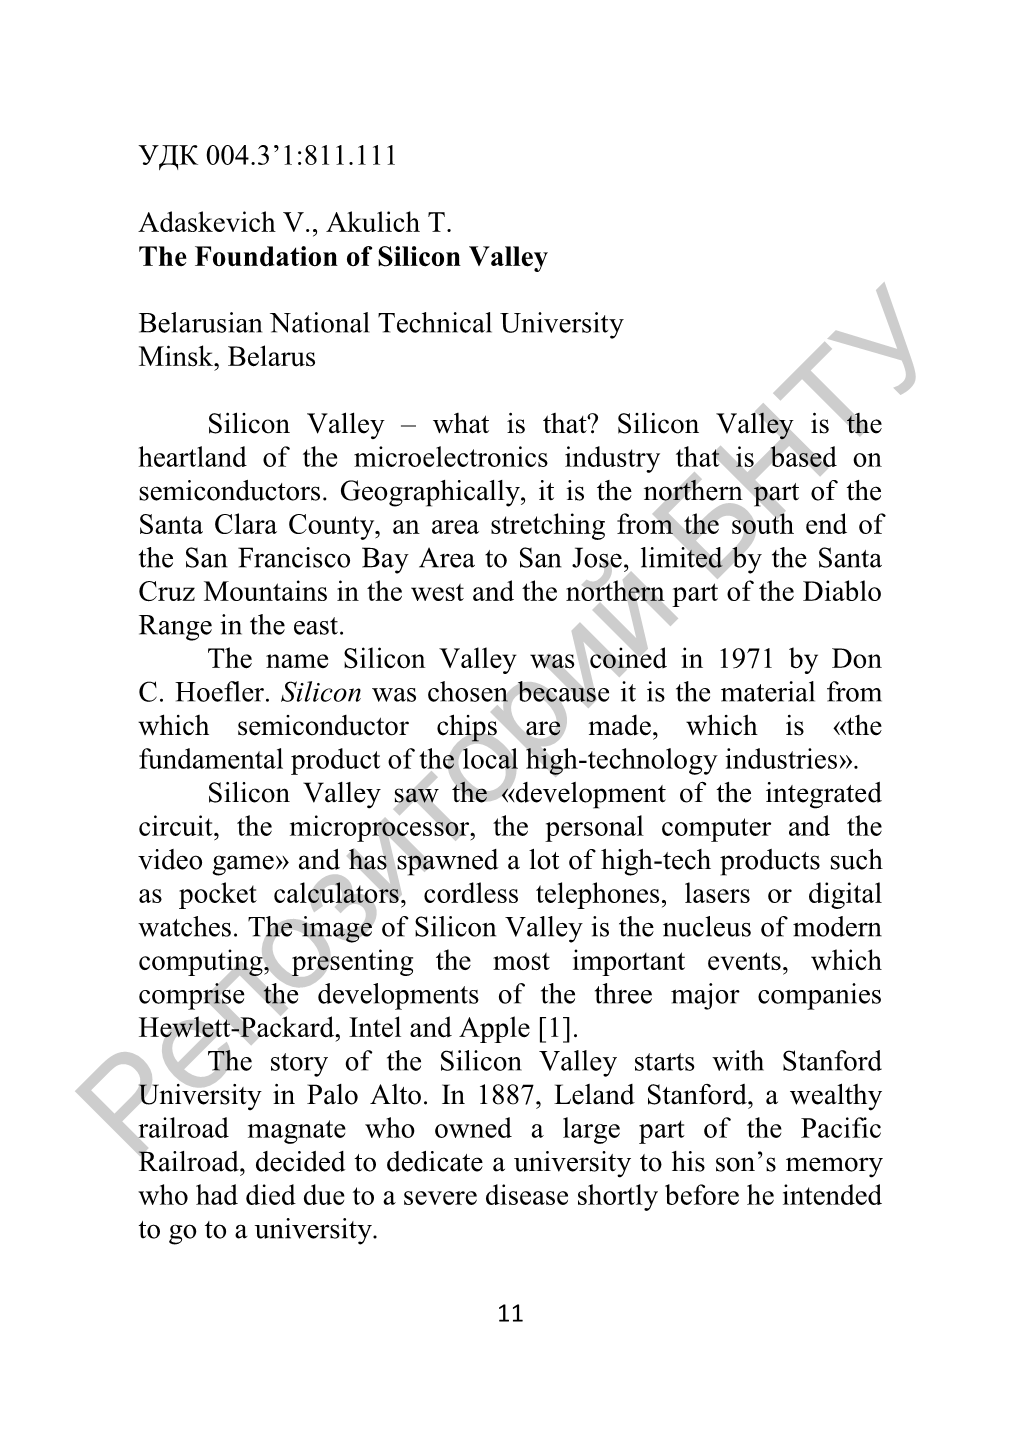 The Foundation of Silicon Valley